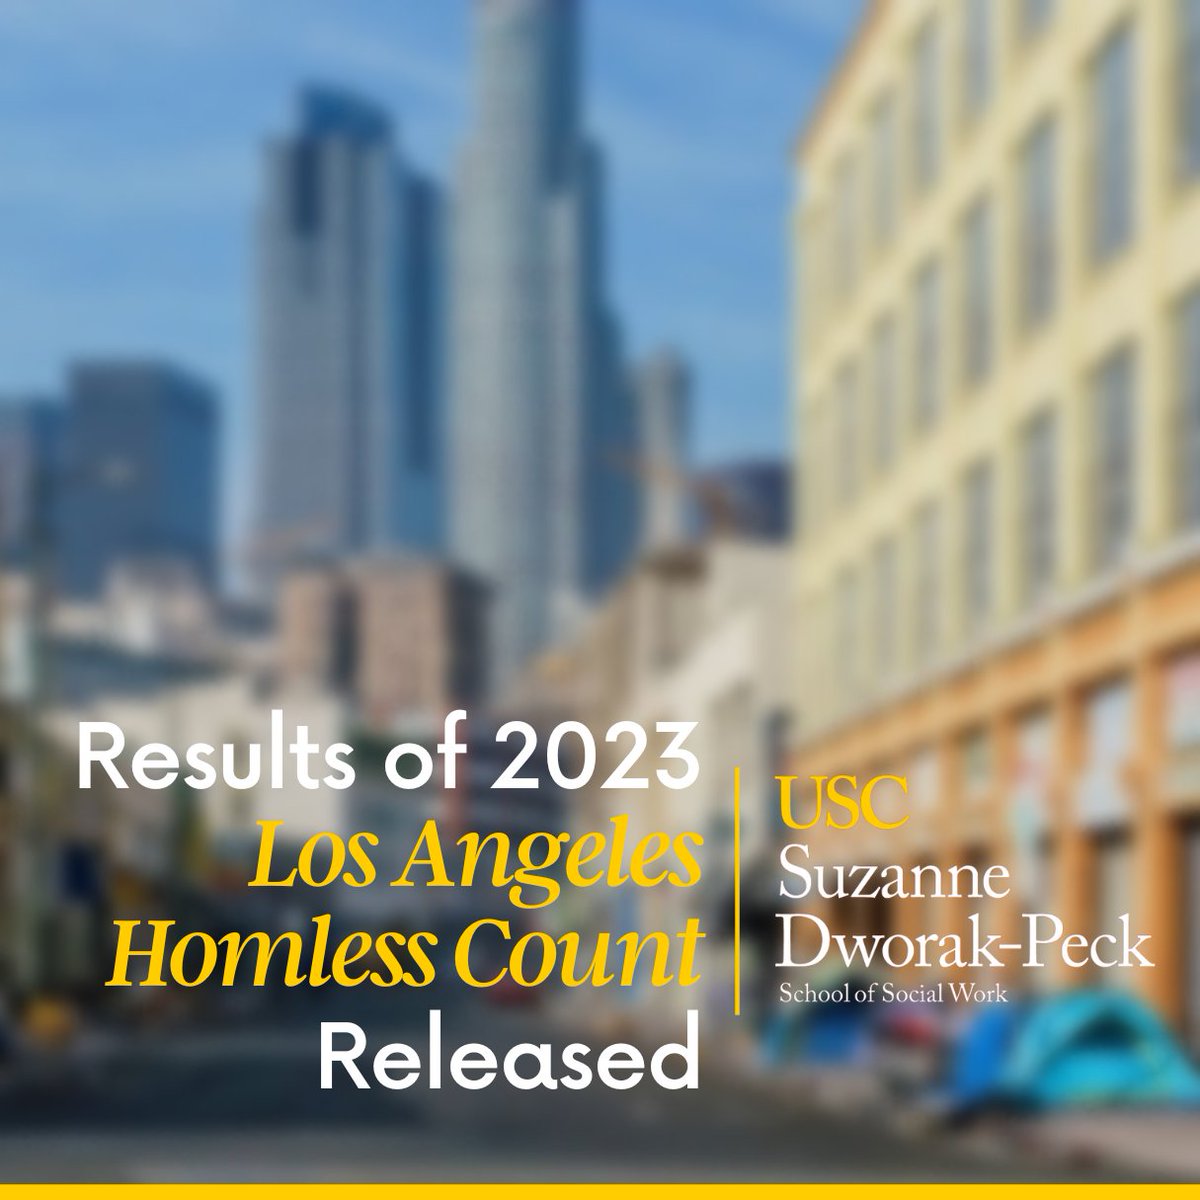 USC Social Work faculty Ben Henwood and the Center for Homelessness, Housing and Health Equity Research led the annual effort to measure the Los Angeles homeless population, in partnership with LAHSA. Read this year’s results here: bit.ly/3r73RSd